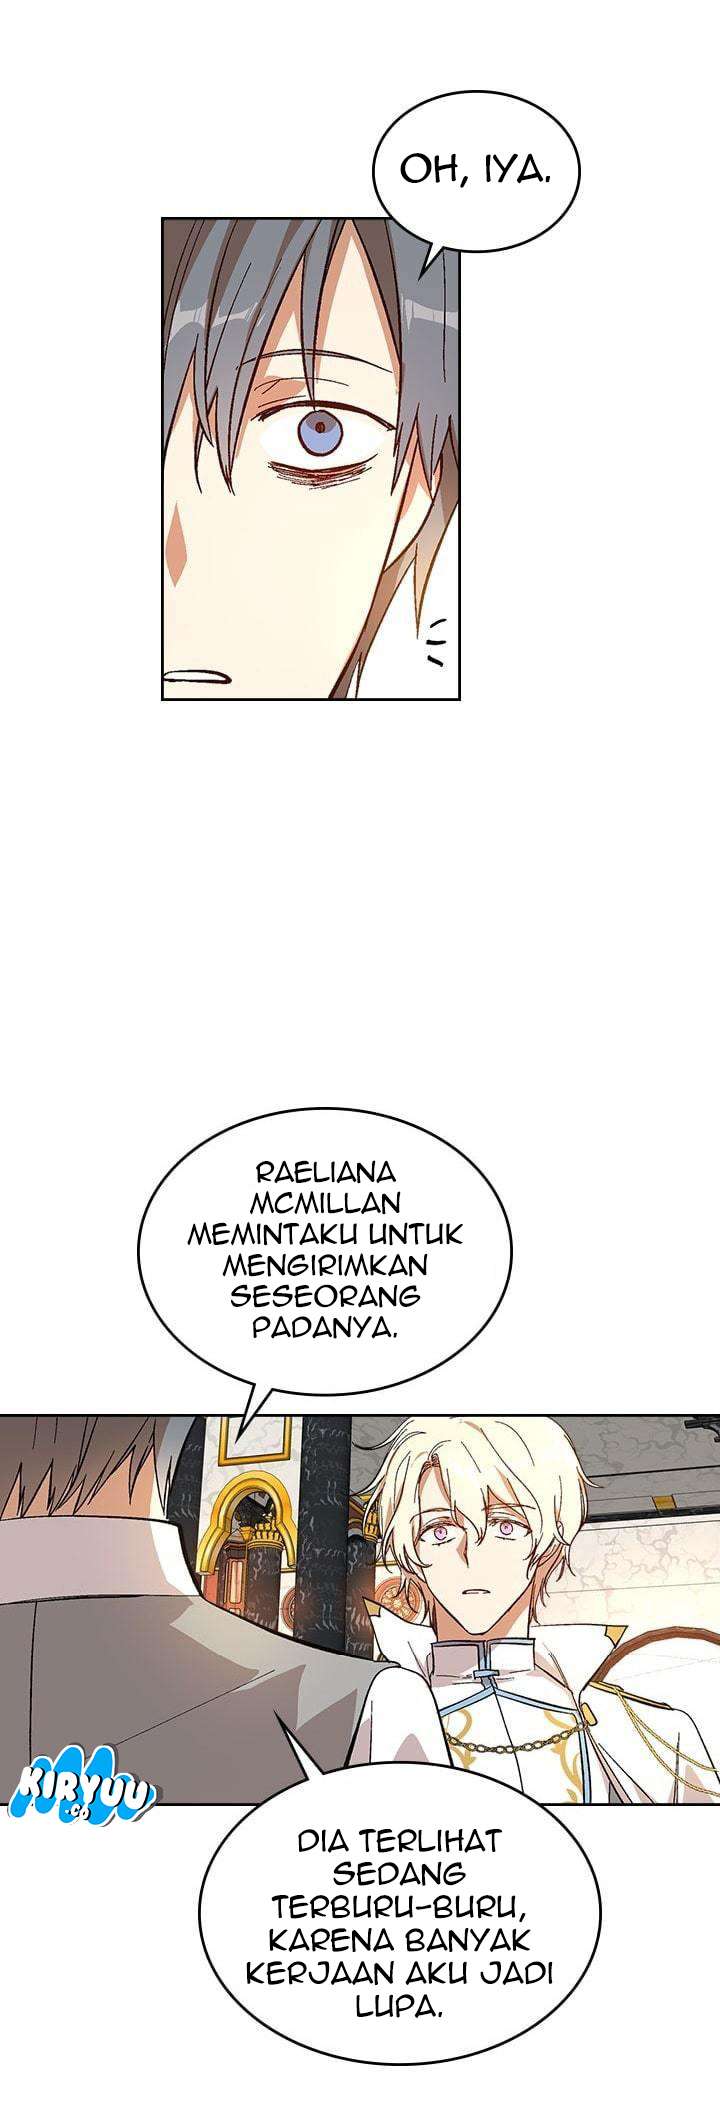 The Reason Why Raeliana Ended Up at the Duke’s Mansion Chapter 85 Bahasa Indonesia